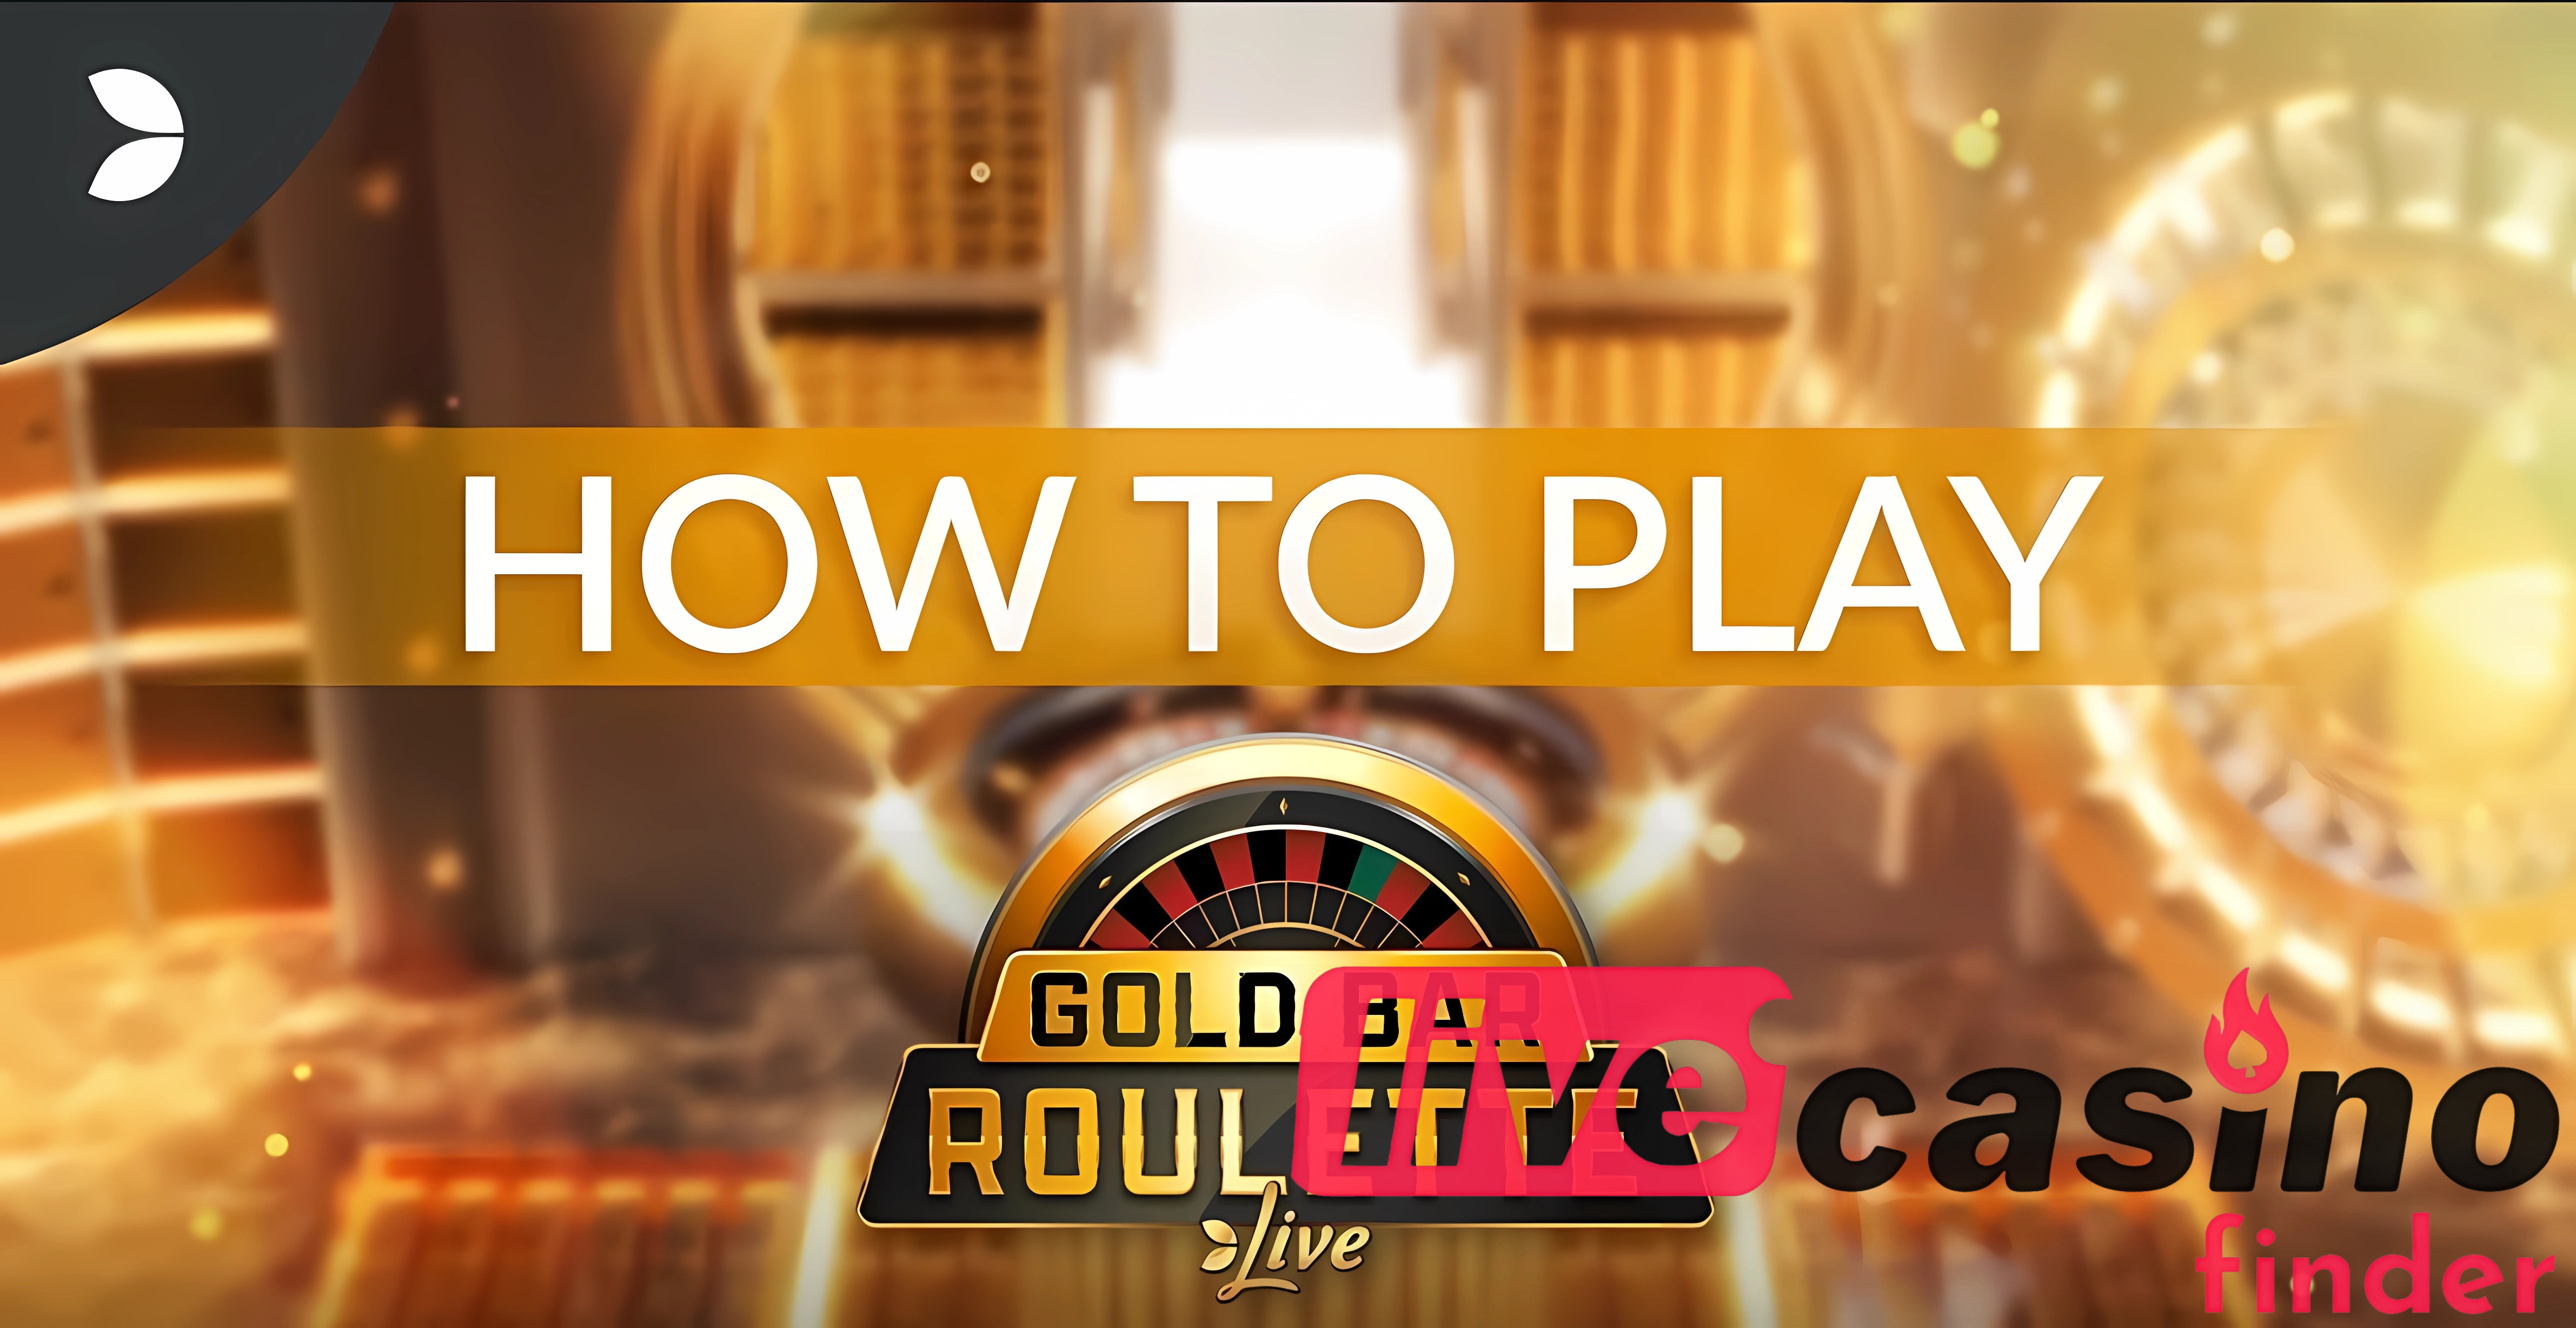 Gold Bar Roulette Live How To Play.